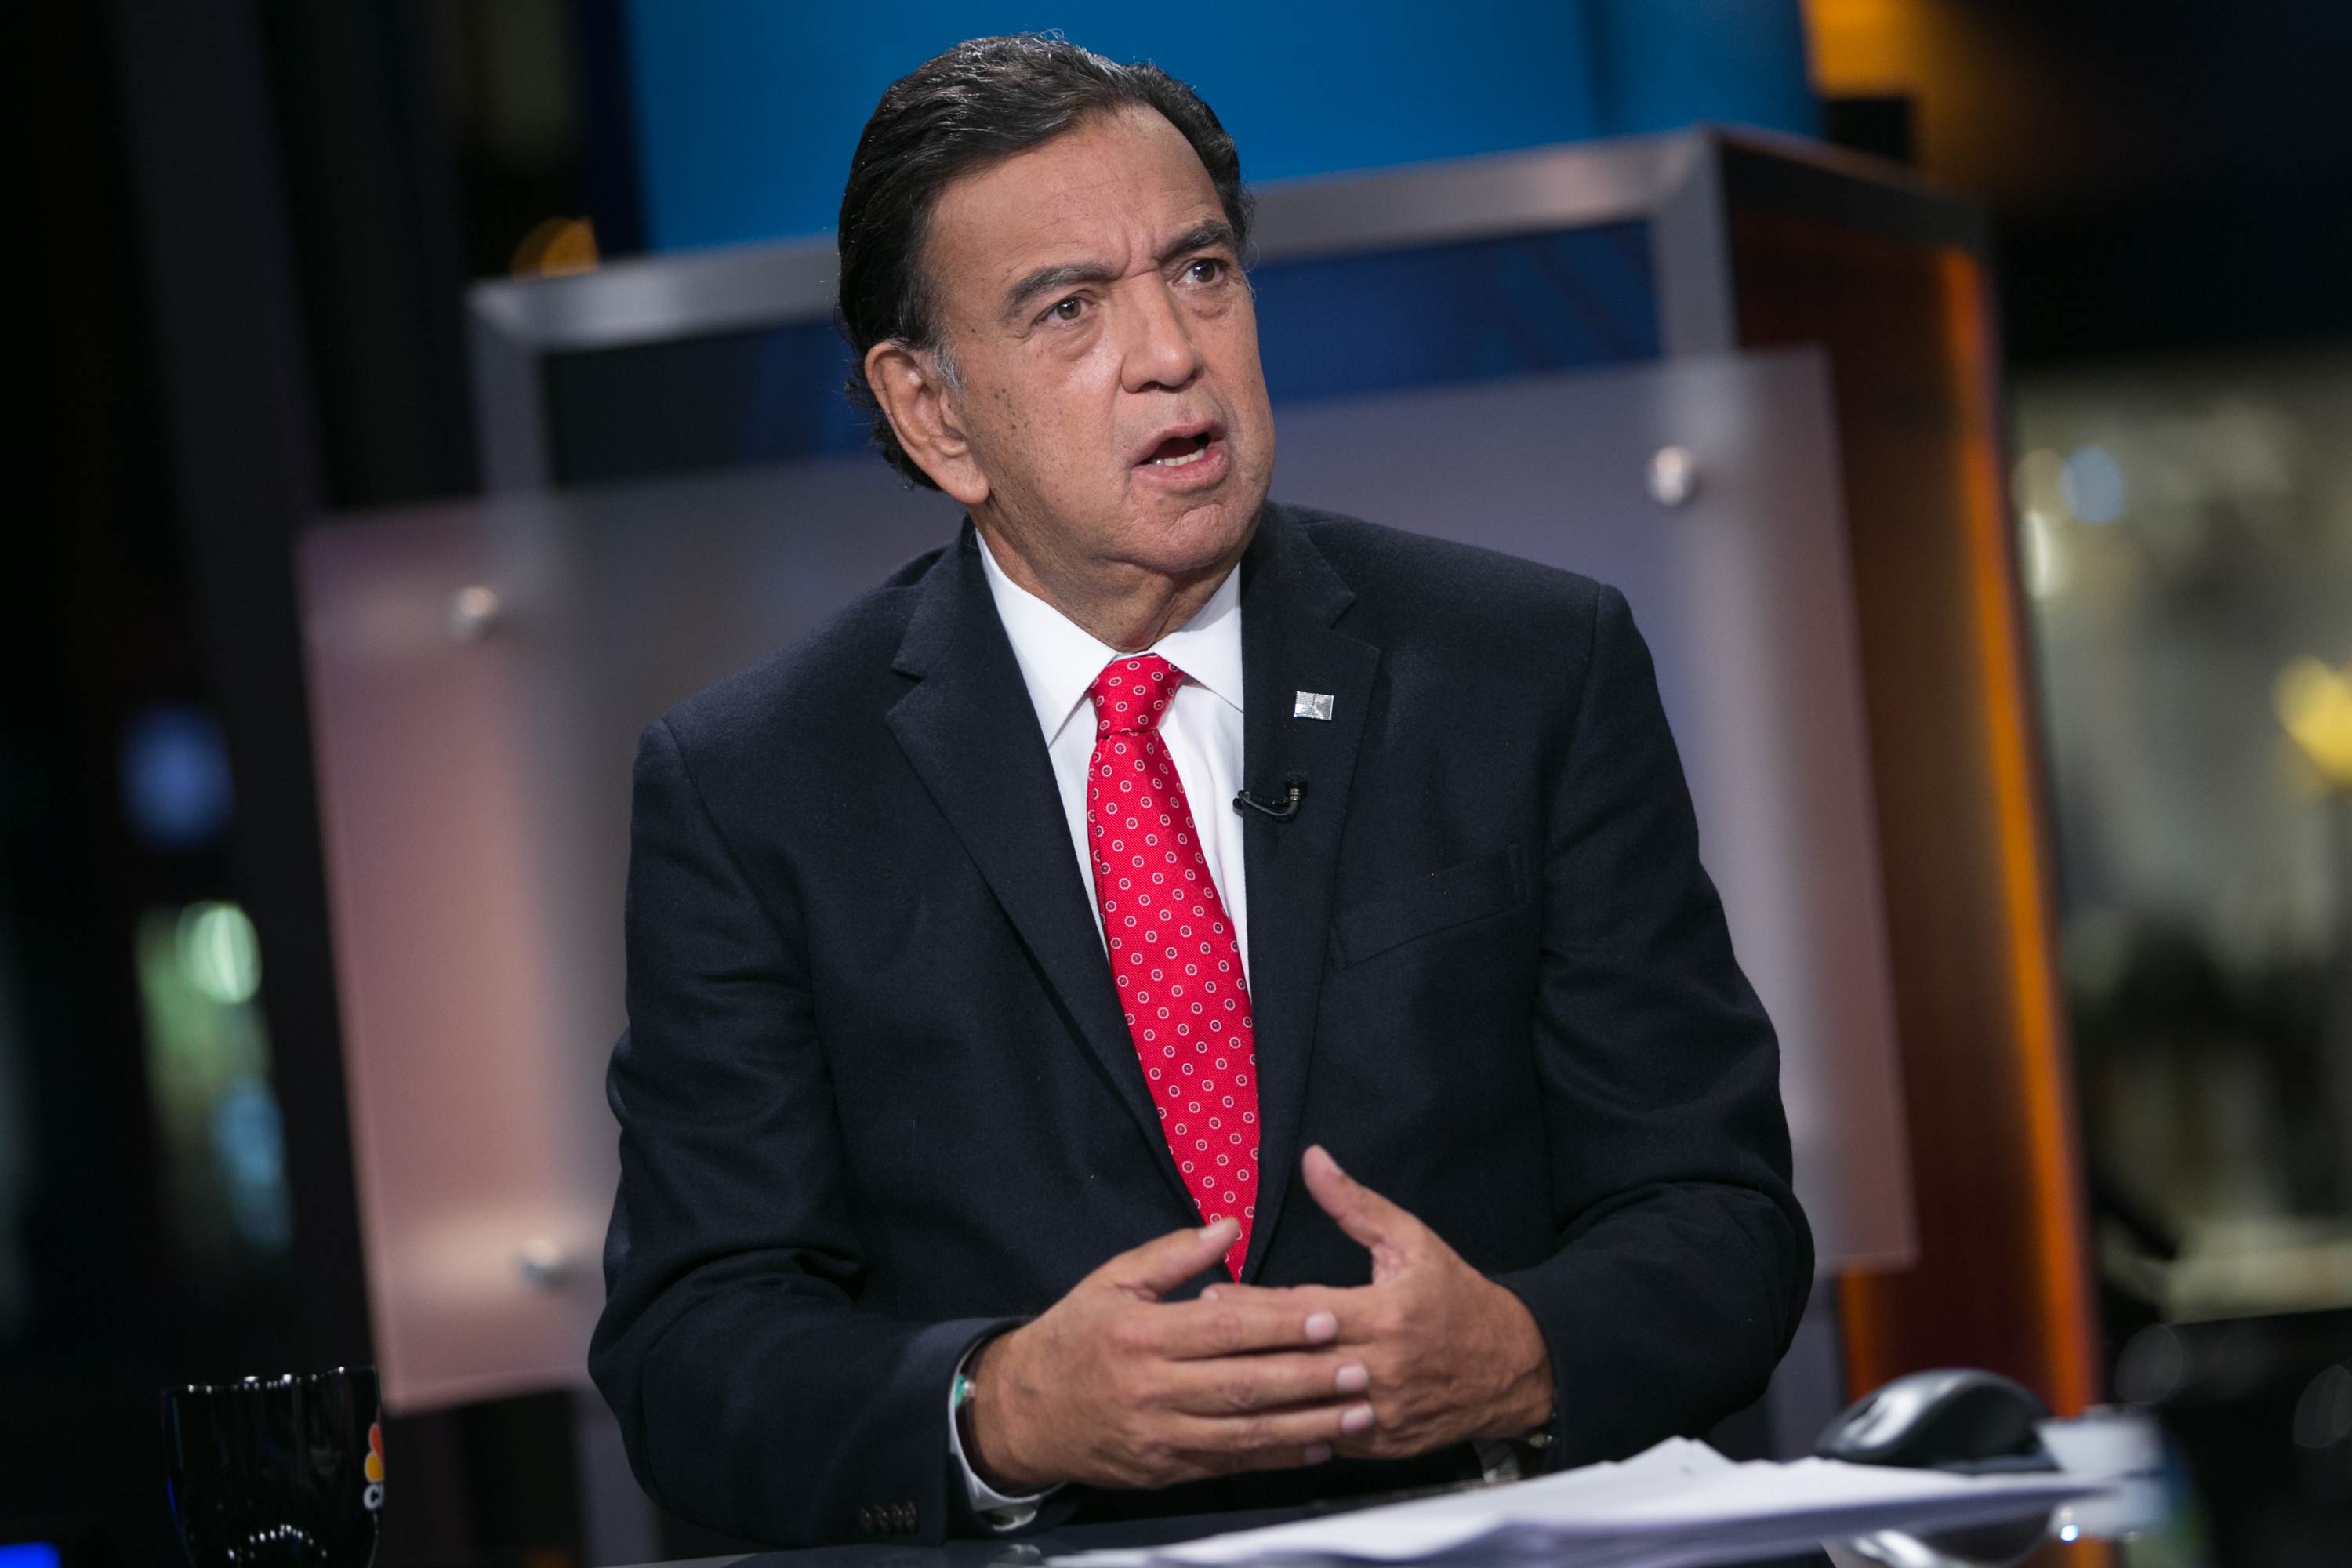 Bill Richardson, former Governor of New Mexico, in an interview on January 13, 2015.